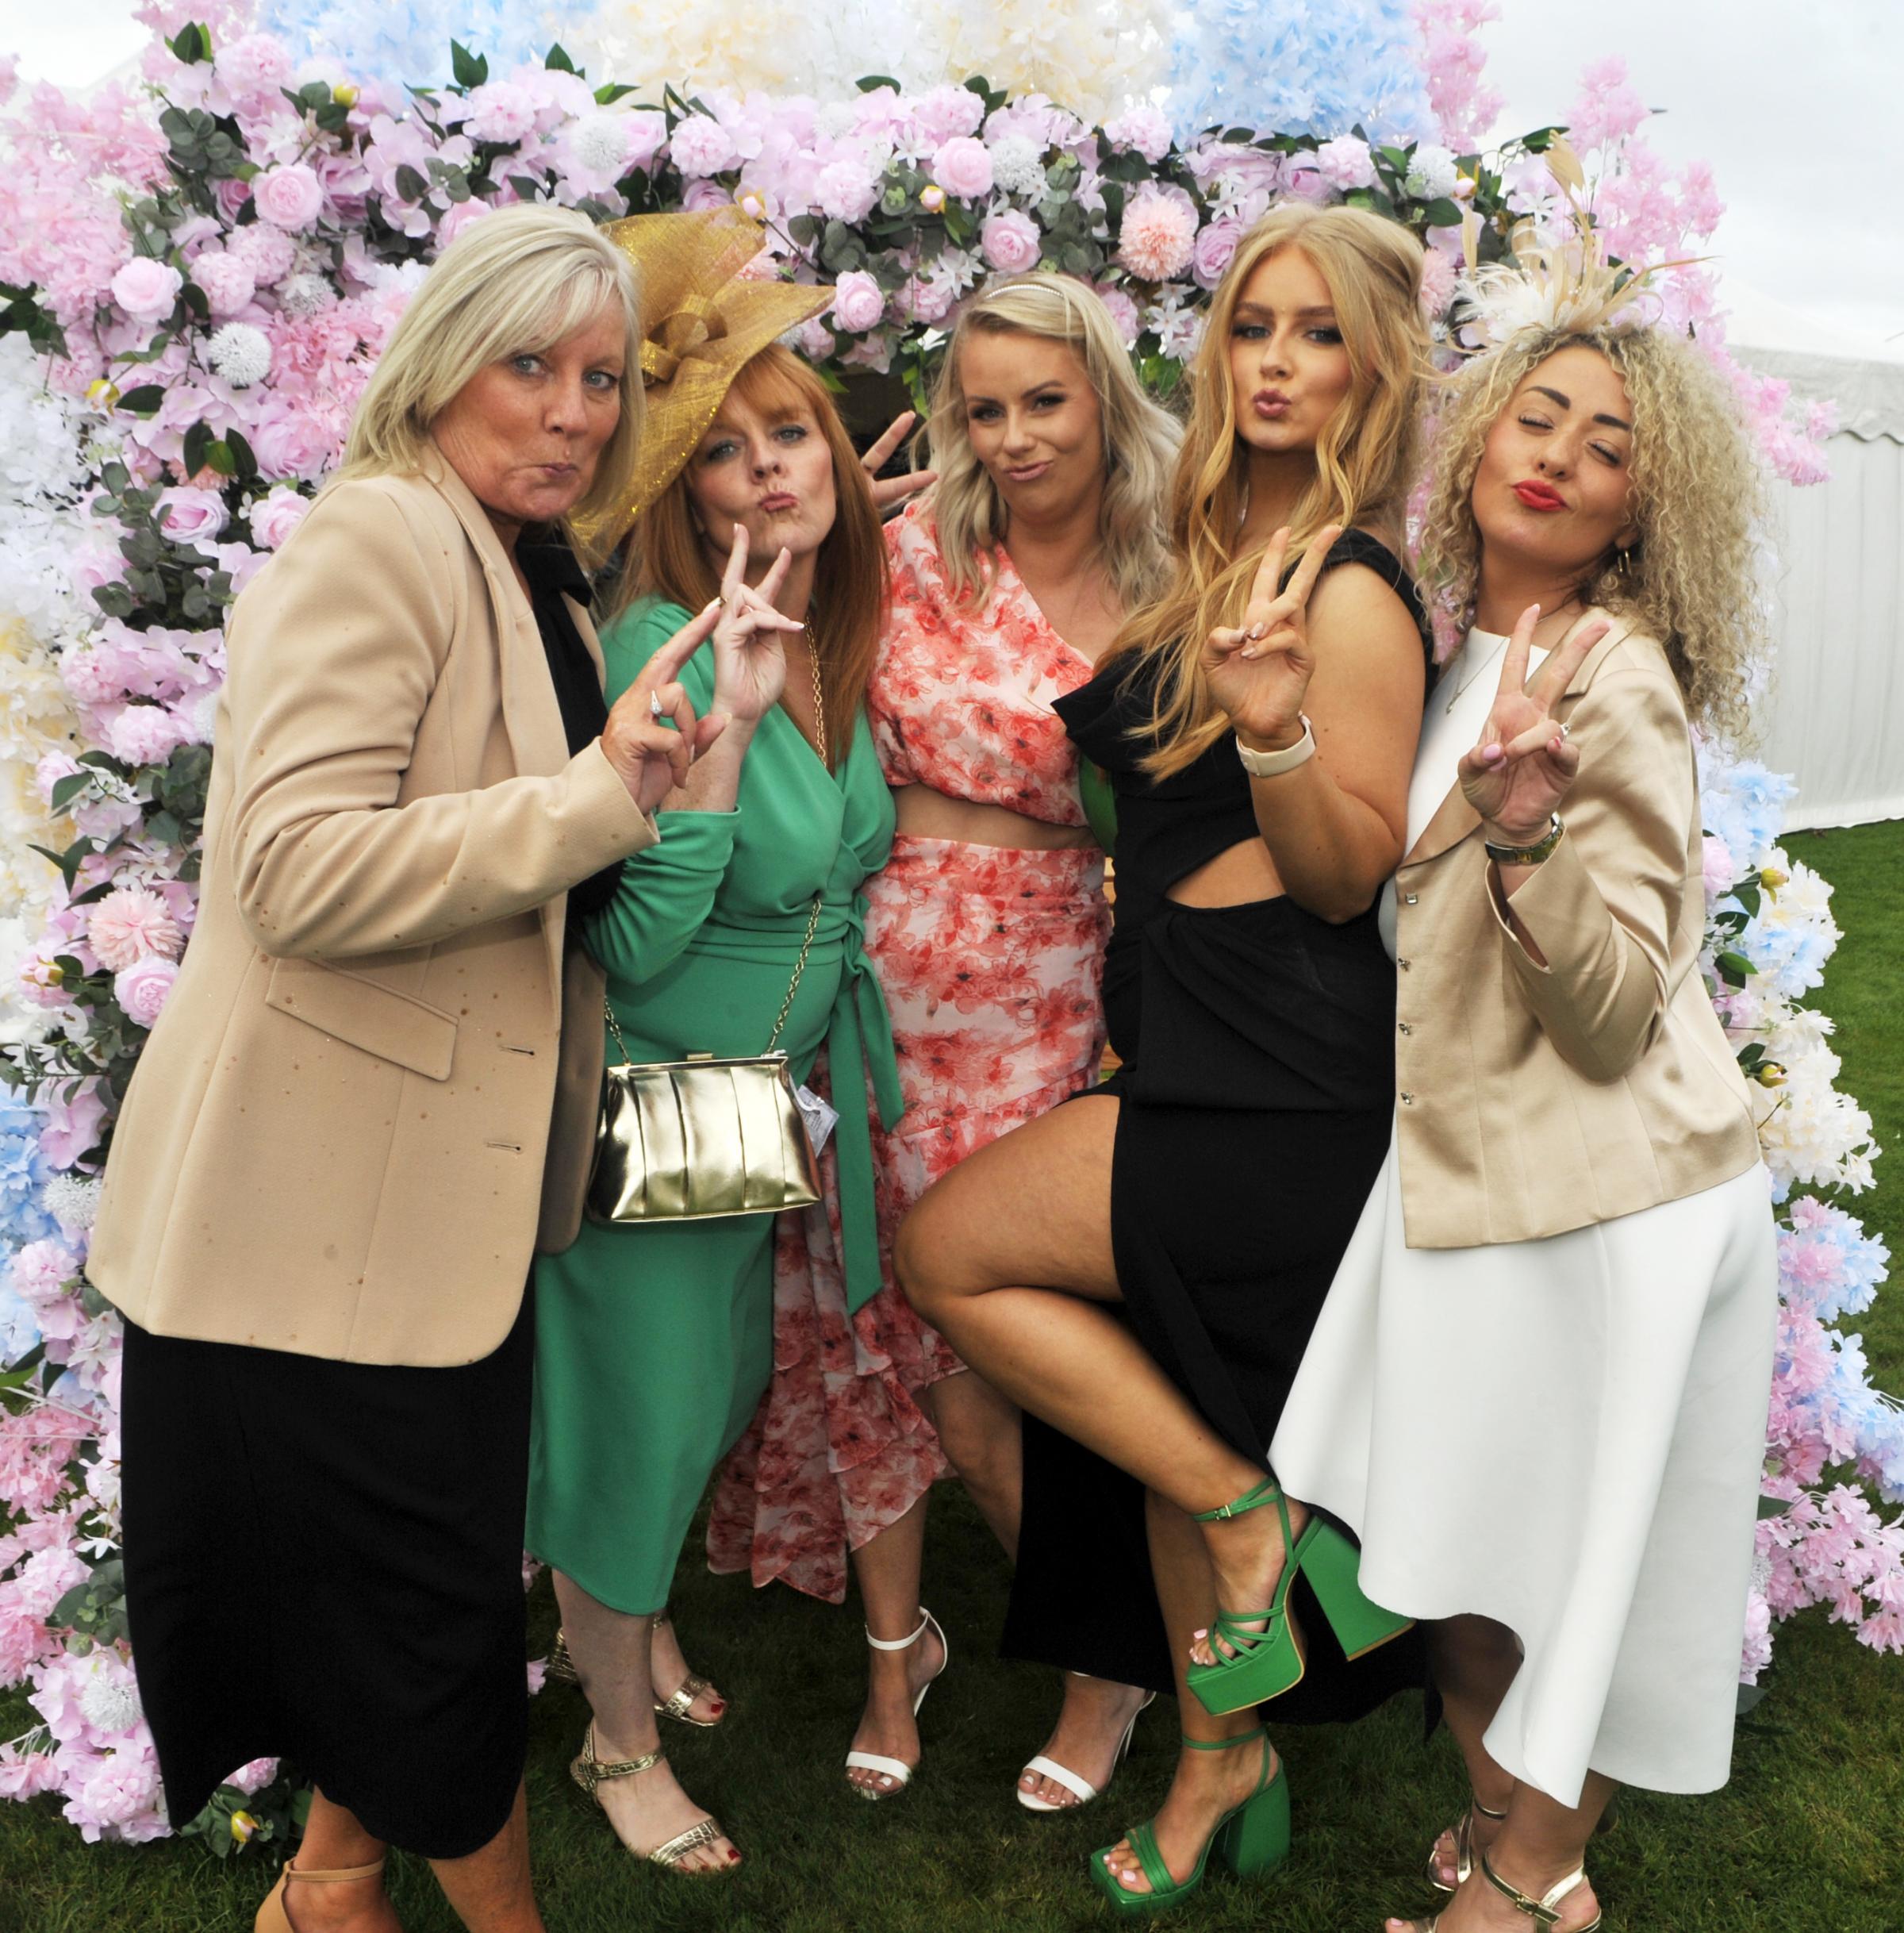 Ladies Day at the Virgin Bet Ayr Gold Cup Festival at Ayr racecourse on Friday, September 22 (Photo: Charlie Gilmour)